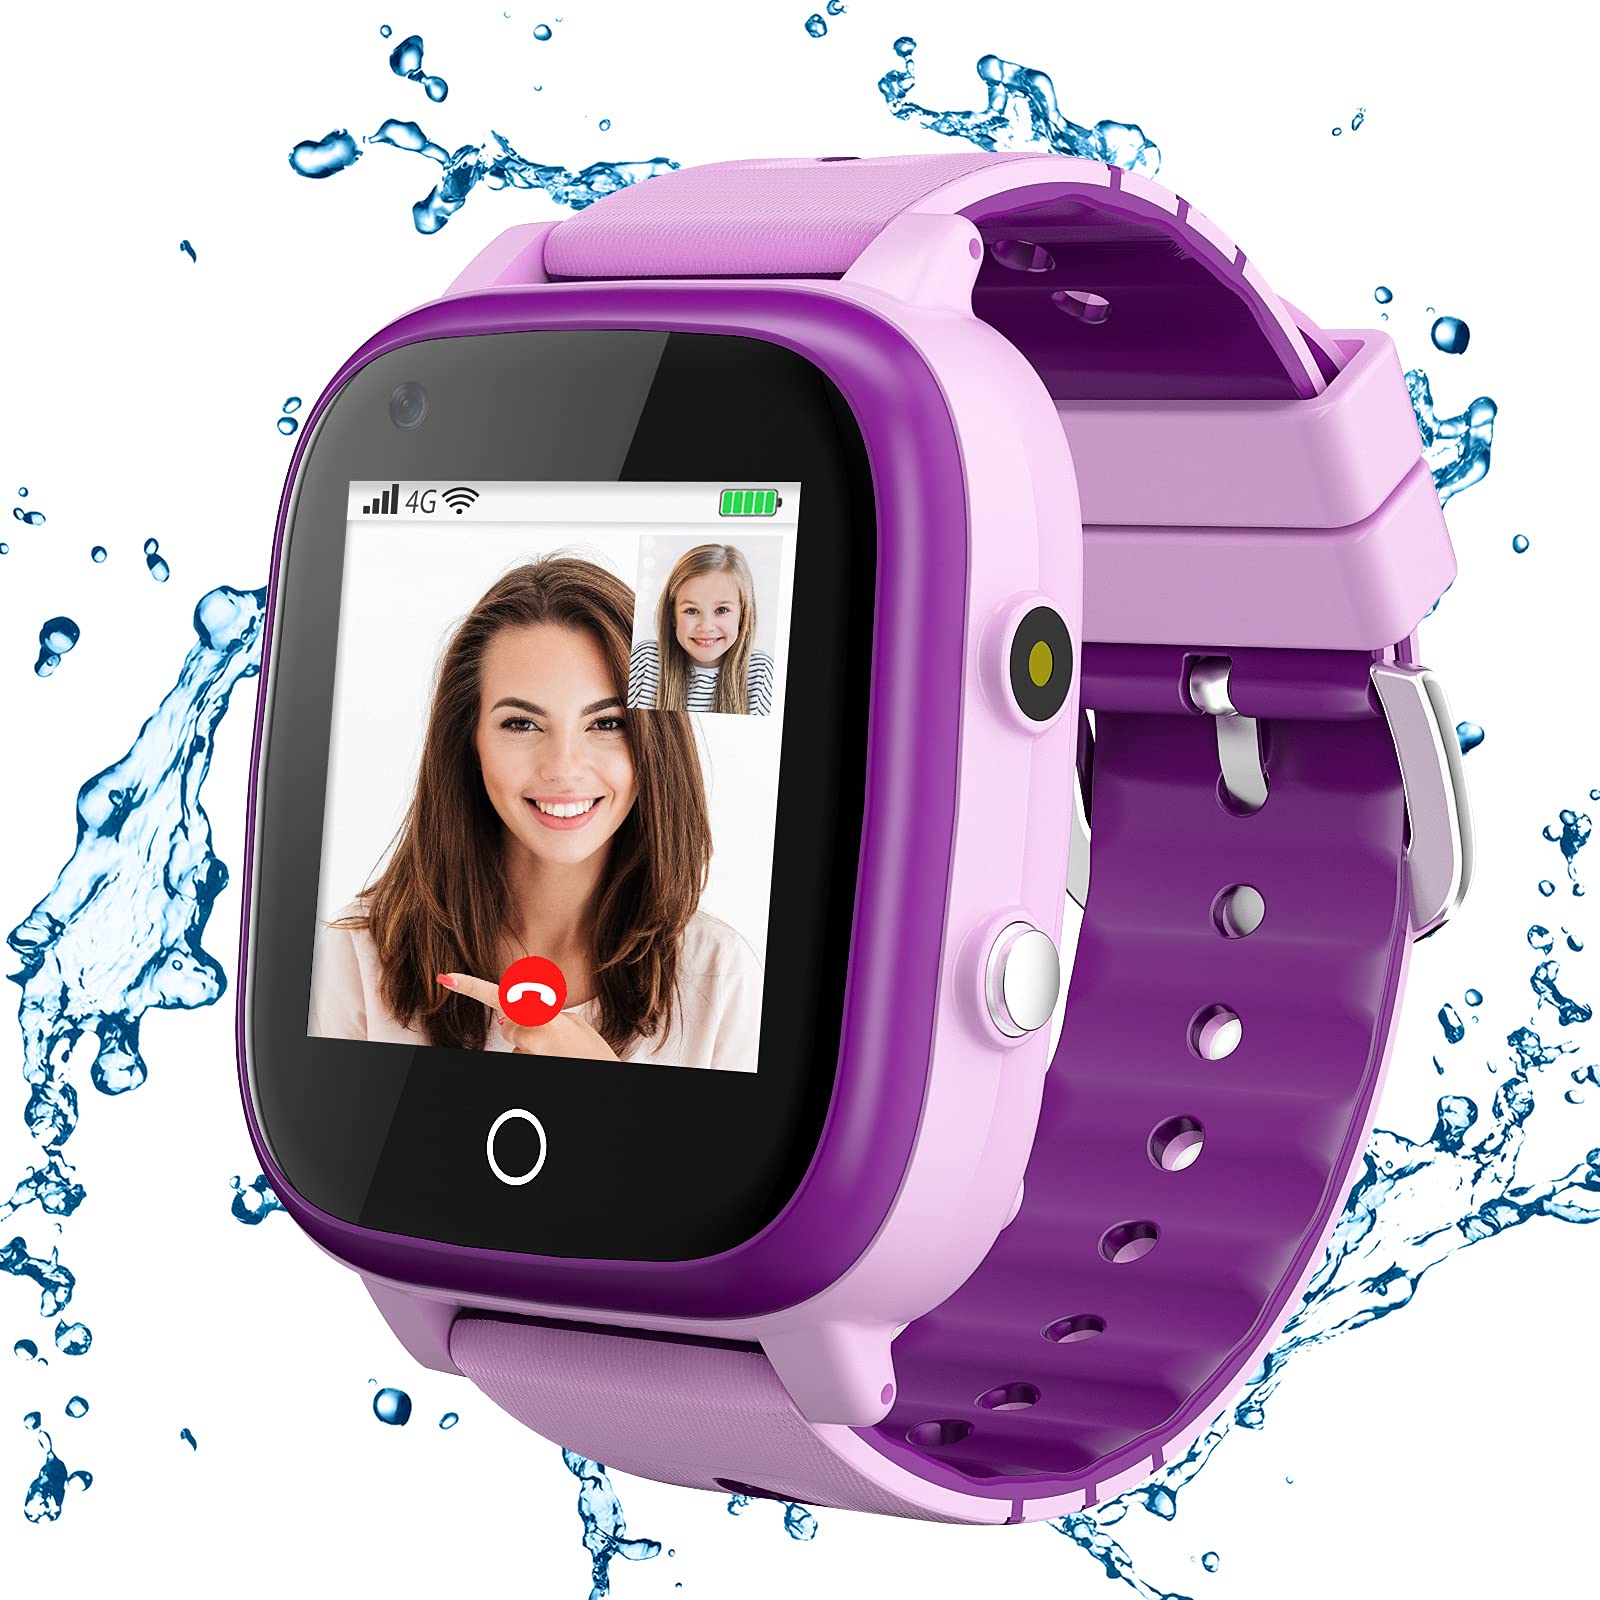 cjc 4G Kids Smart Watch with GPS Tracker and Calling, 2 Way Call SOS Kids Cell Phone Watch, Touch Screen Watch,3-15 Years Boys Girls Birthday (T3 Purple)